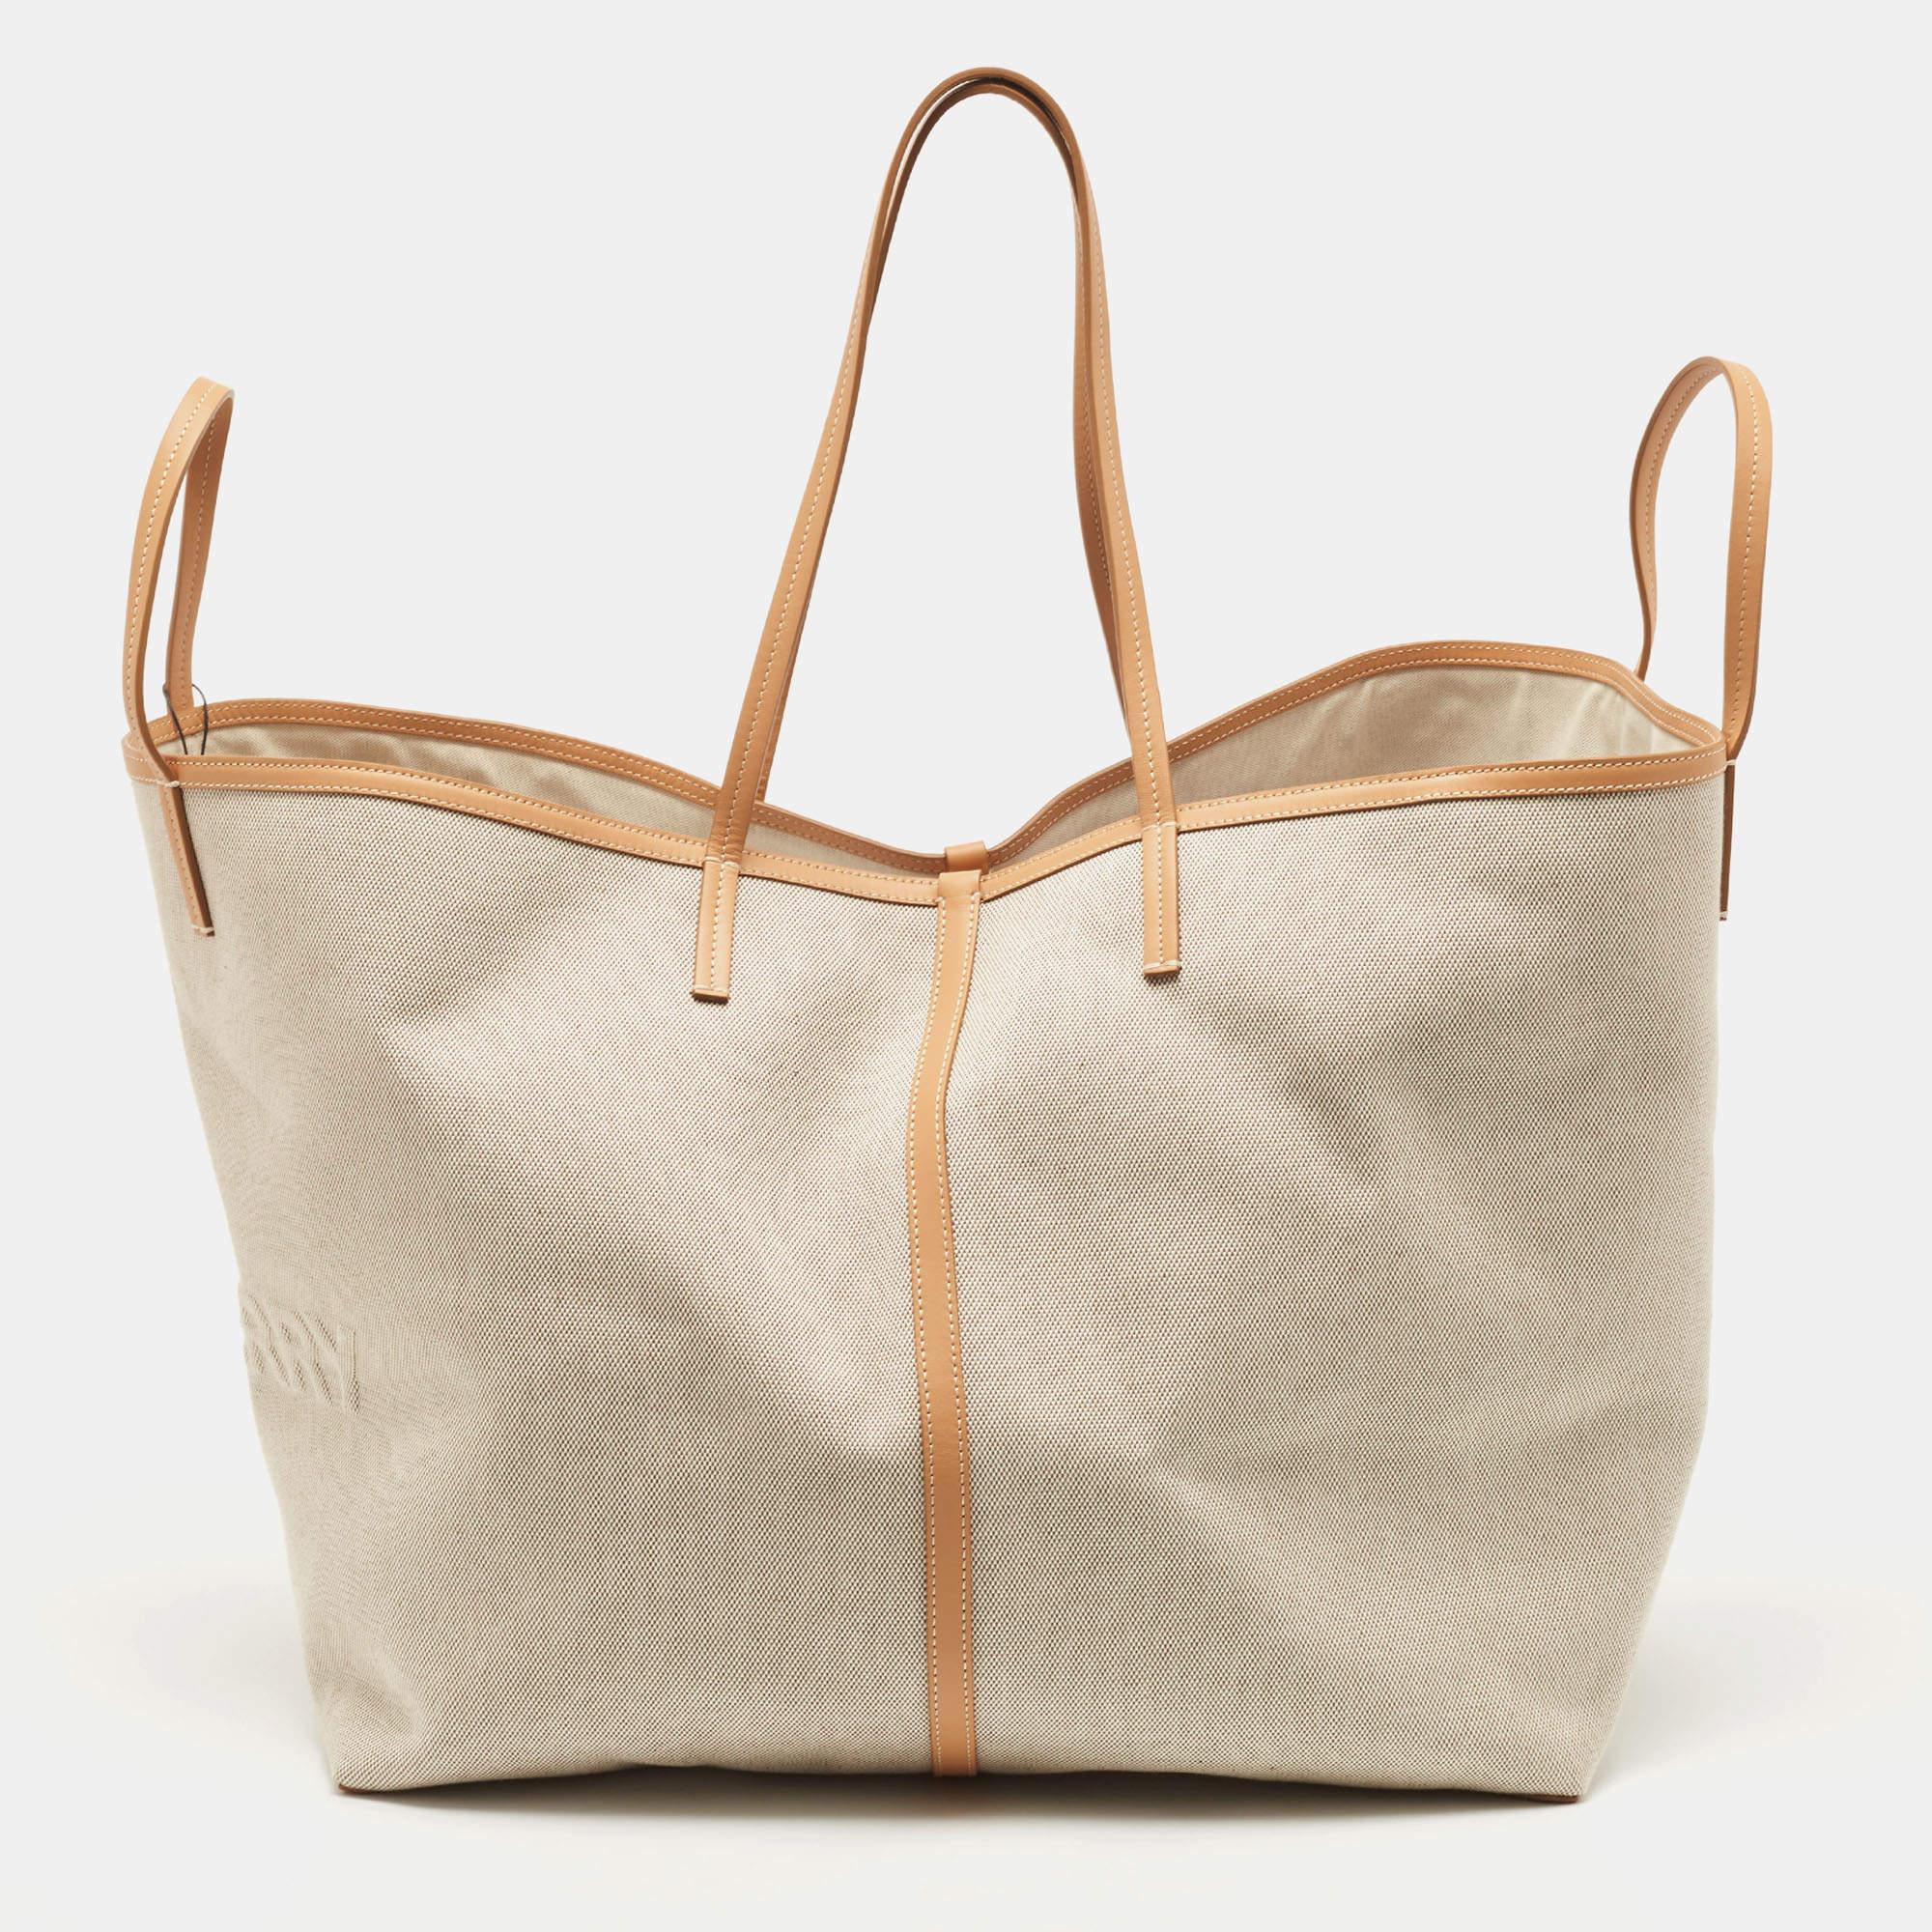 Burberry Natural/Beige Canvas and Leather XL Beach Tote 8